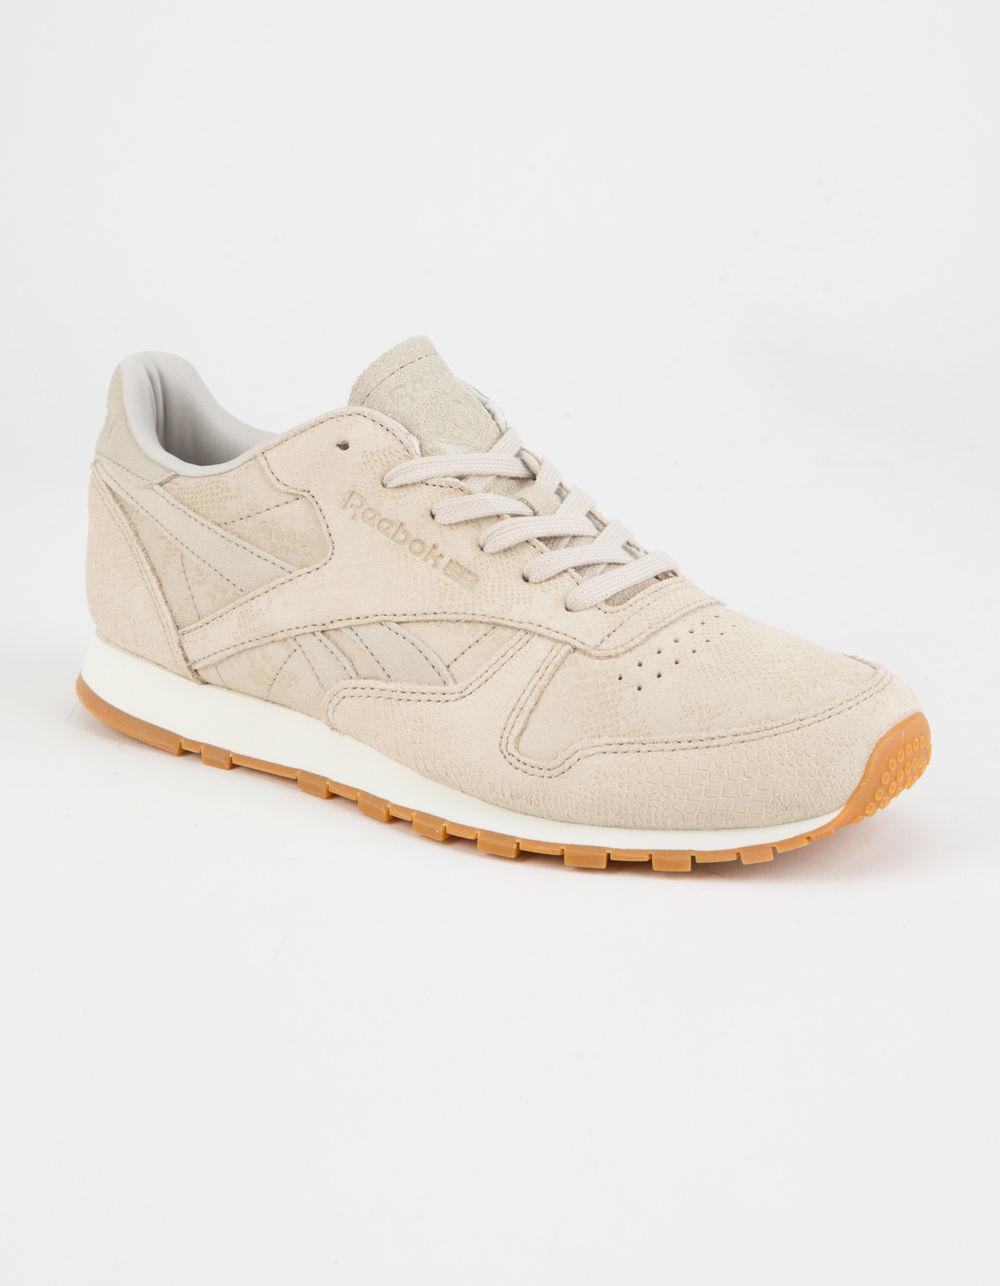 reebok classic leather clean exotics womens shoes